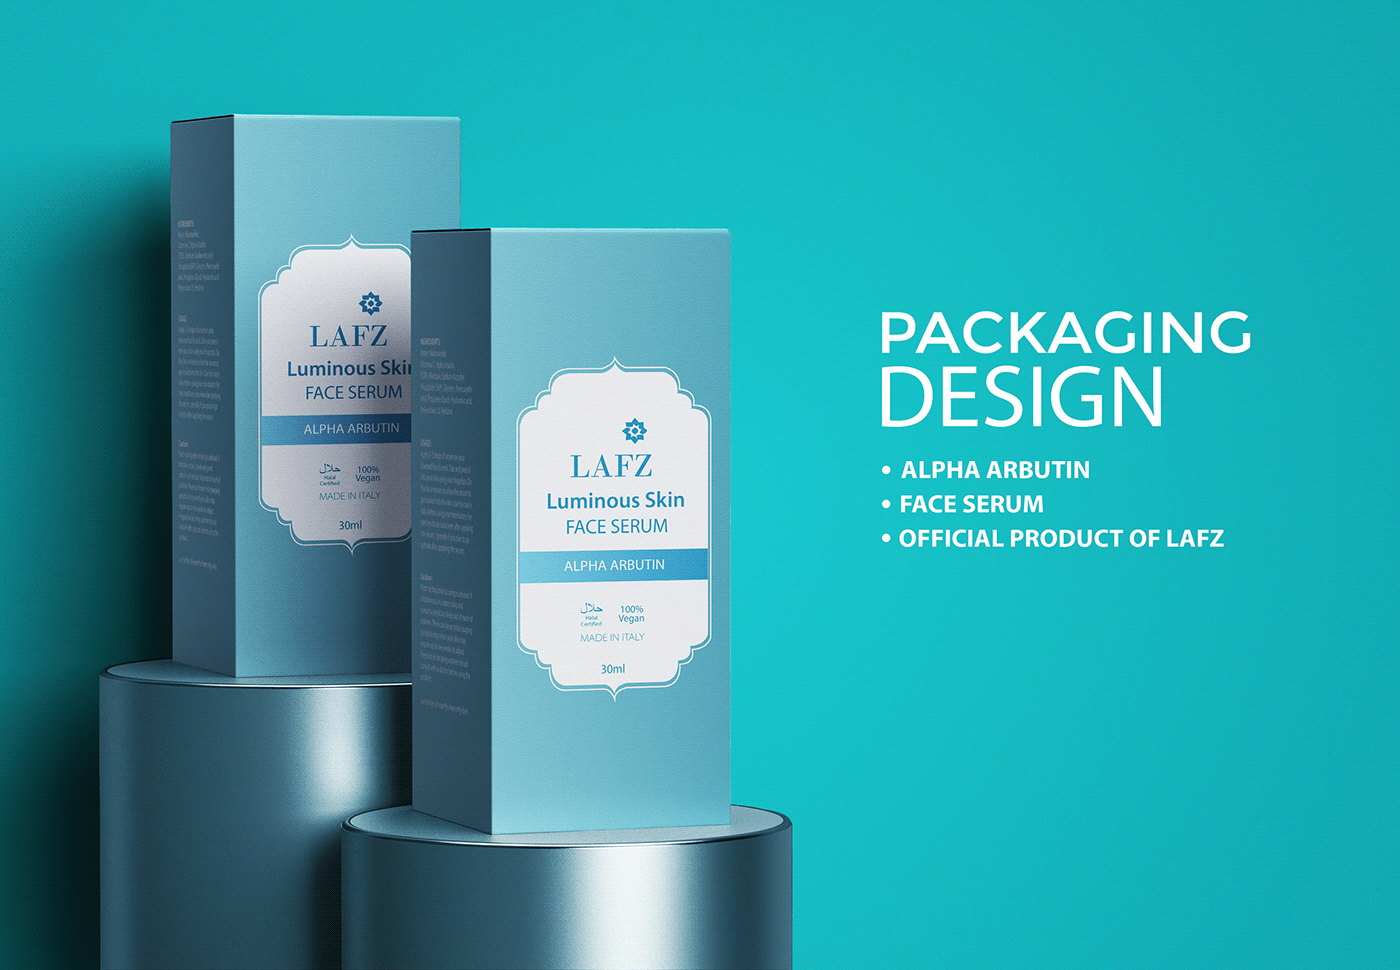 cosmetic packaging Dropper Label Design Packaging packaging design serum dropper packaging cosmetic product design Dropper Label lafz packaging product